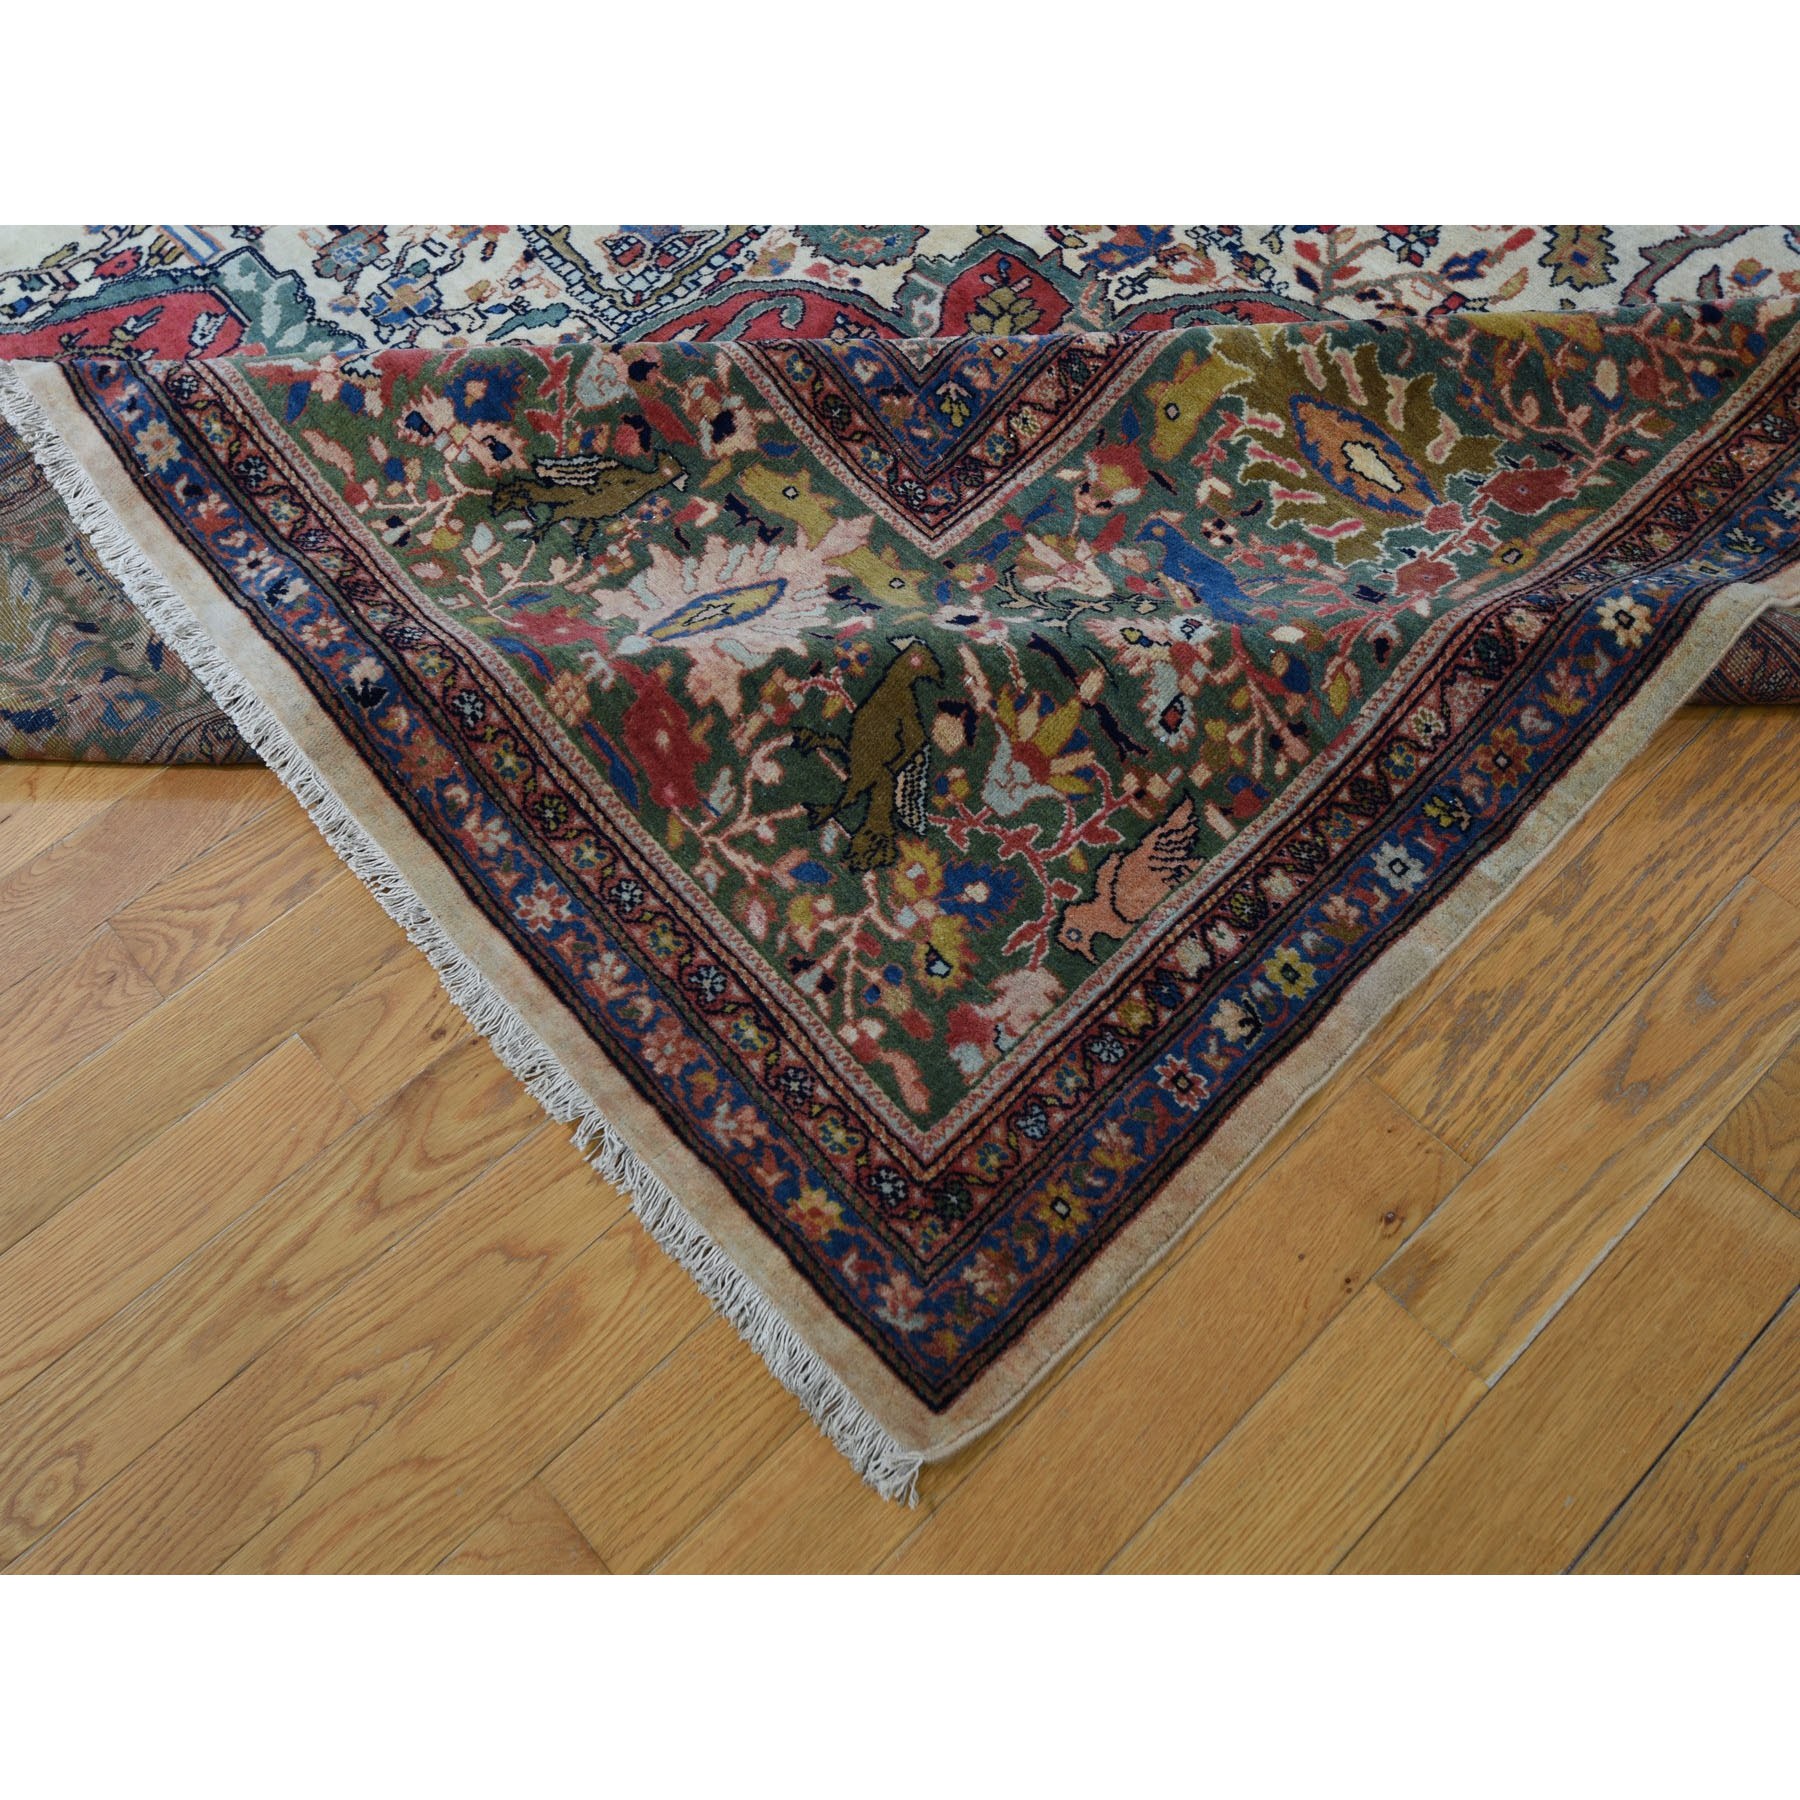 12-2 x18-8  Oversized Antique Persian Sarouk Fereghan With Birds Full Pile And Soft Hand Knotted Oriental Rug 